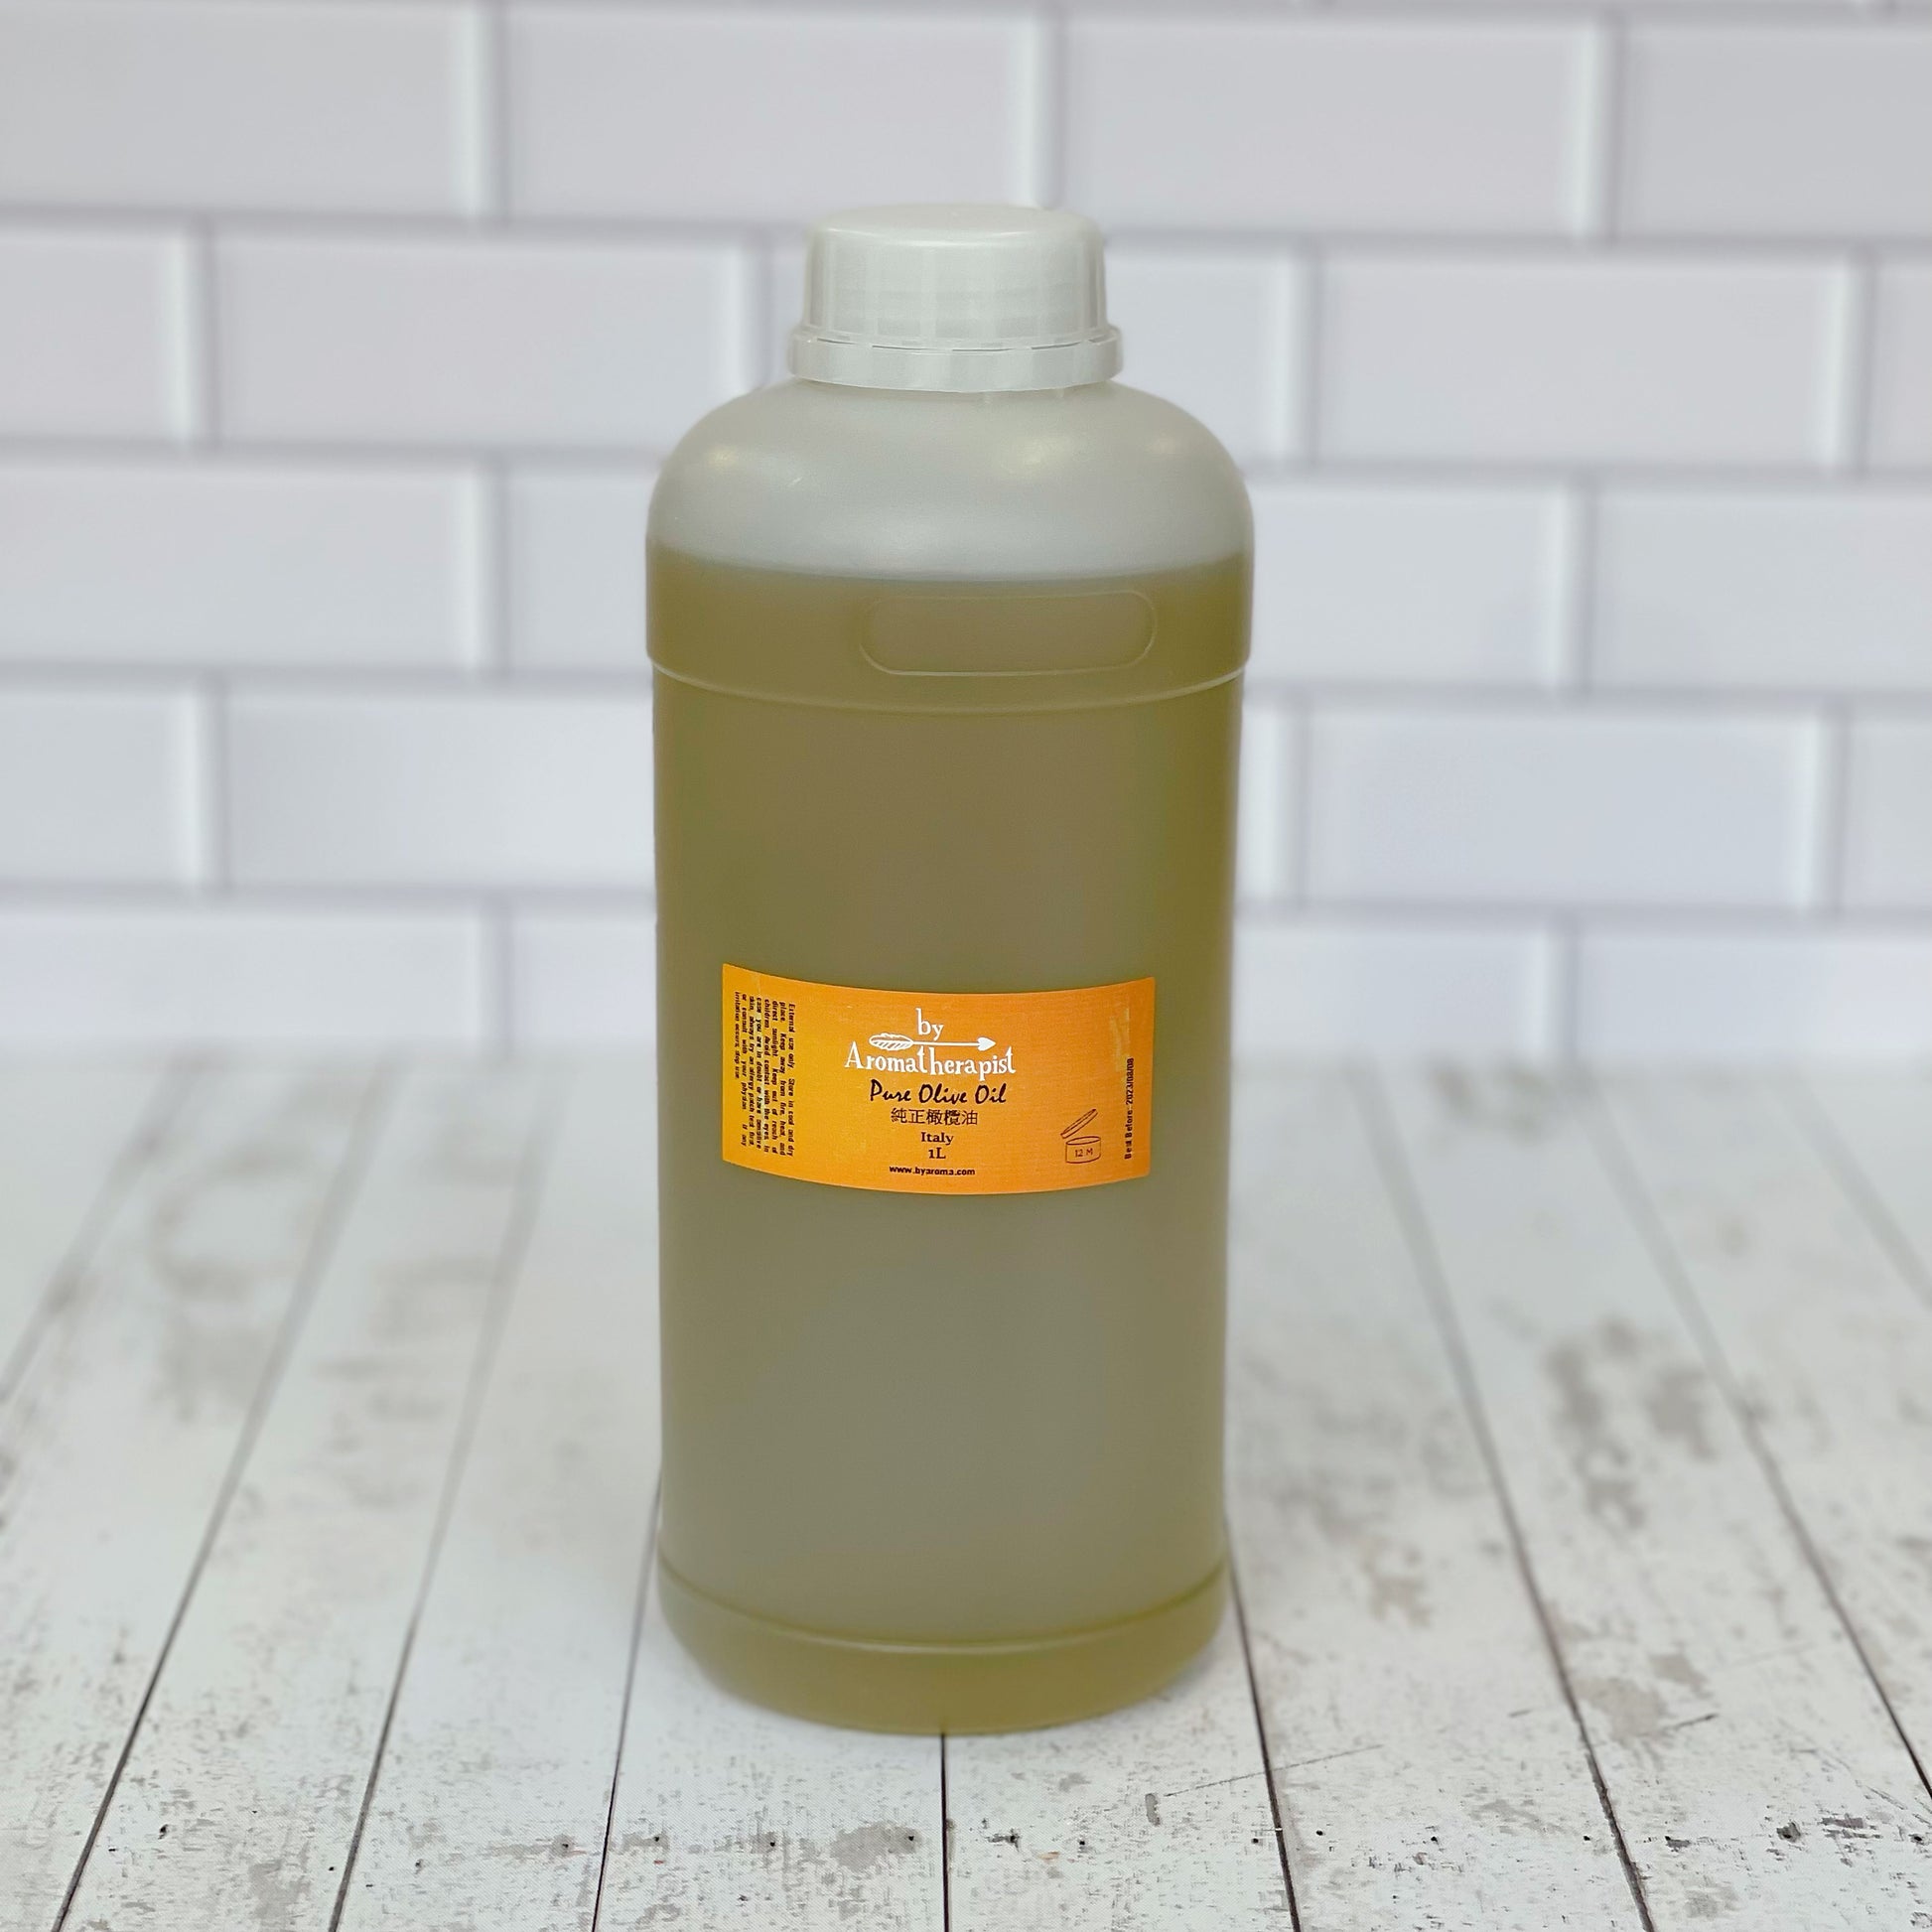 Pure Olive Oil 純正橄欖油 (1L) - Discover Health & Lifestyle Asia